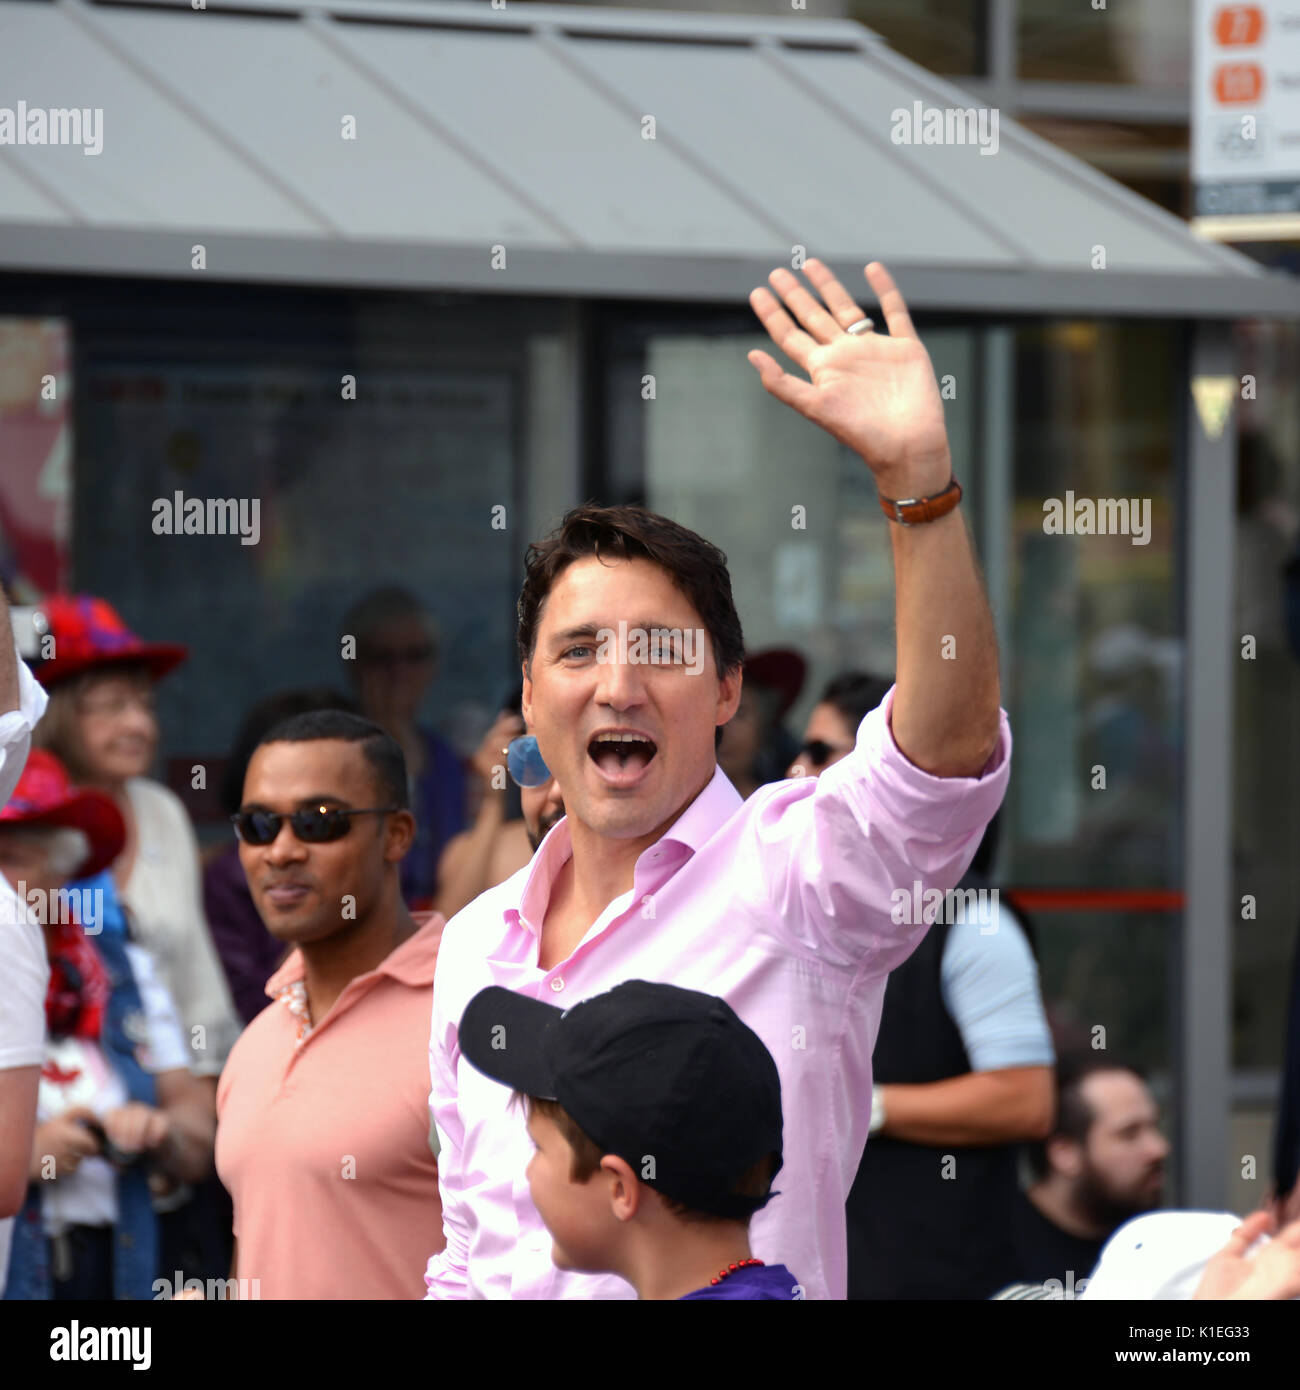 Ottawa, Canada. 27th Aug, 2017. Canadian Prime Minister Justin Trudeau marches in the Ottawa Pride Parade, becoming to first sitting PM to participate in that event for the city. Credit: Paul McKinnon/Alamy Live News Stock Photo